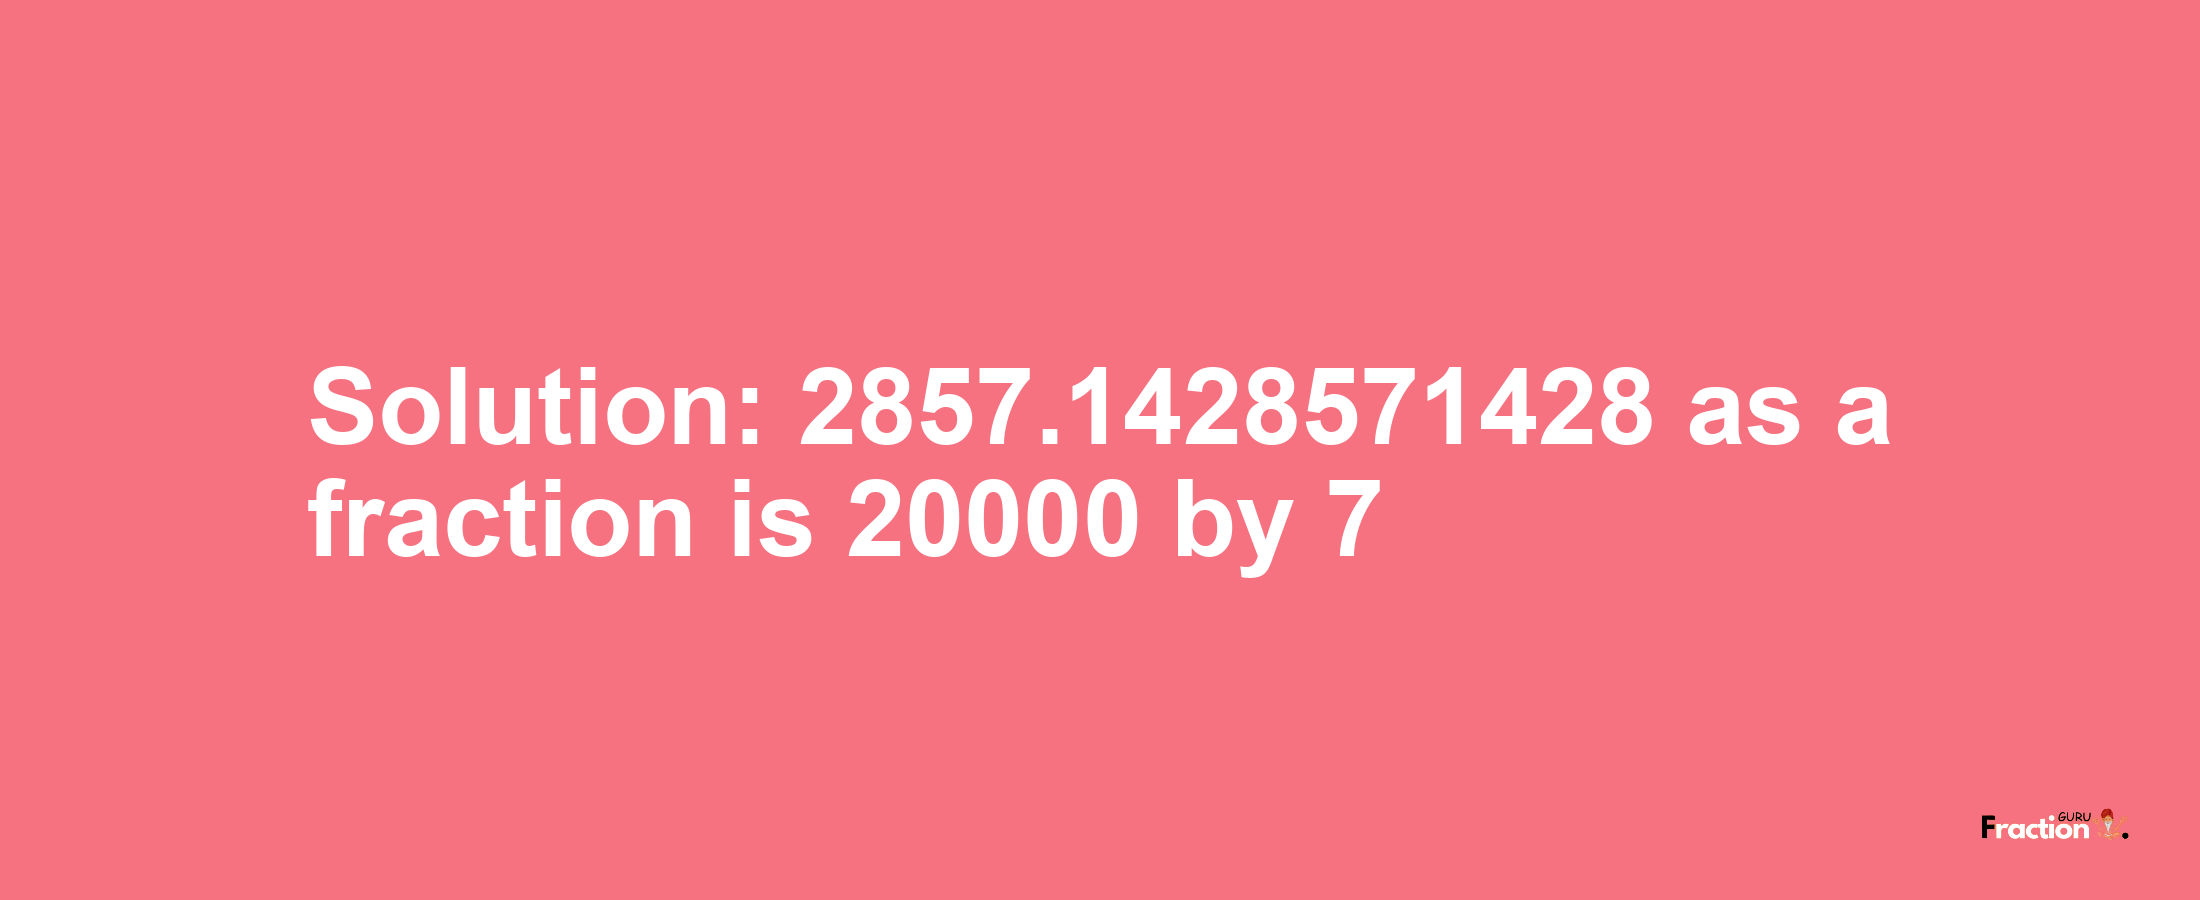 Solution:2857.1428571428 as a fraction is 20000/7